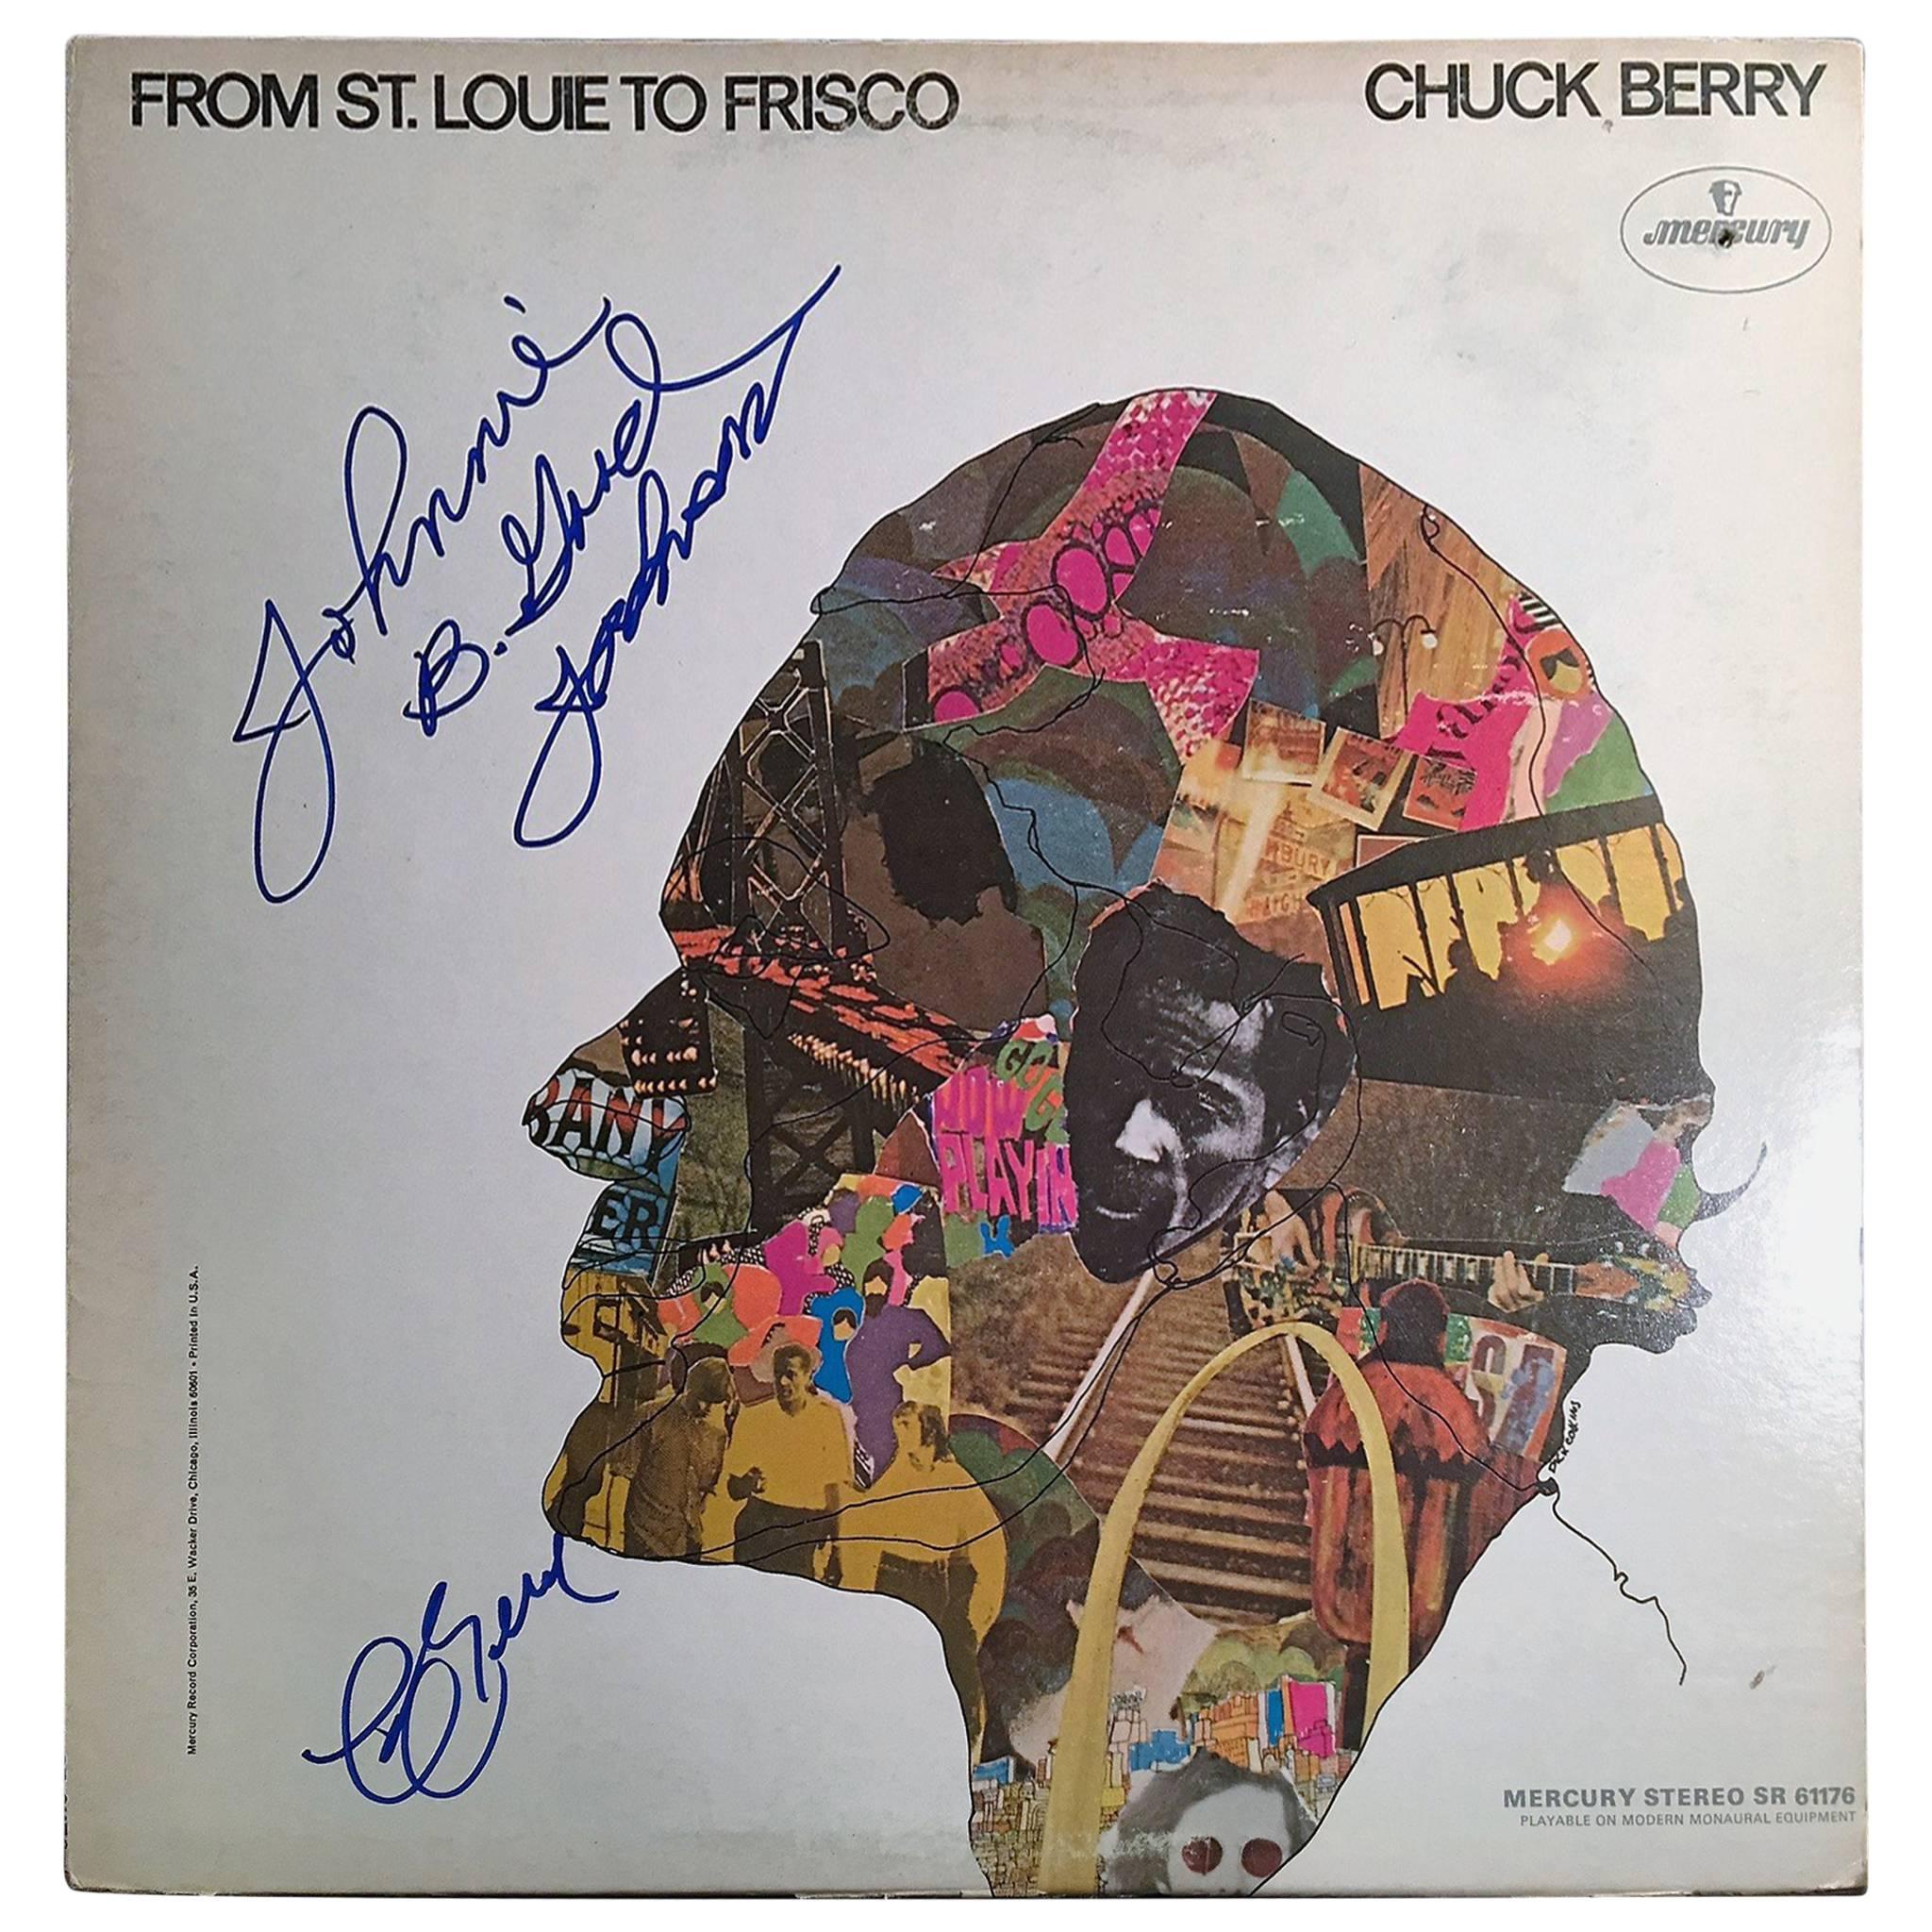 Colorful Autographed Chuck Berry Album Cover 'from St.Louie to Frisco For Sale